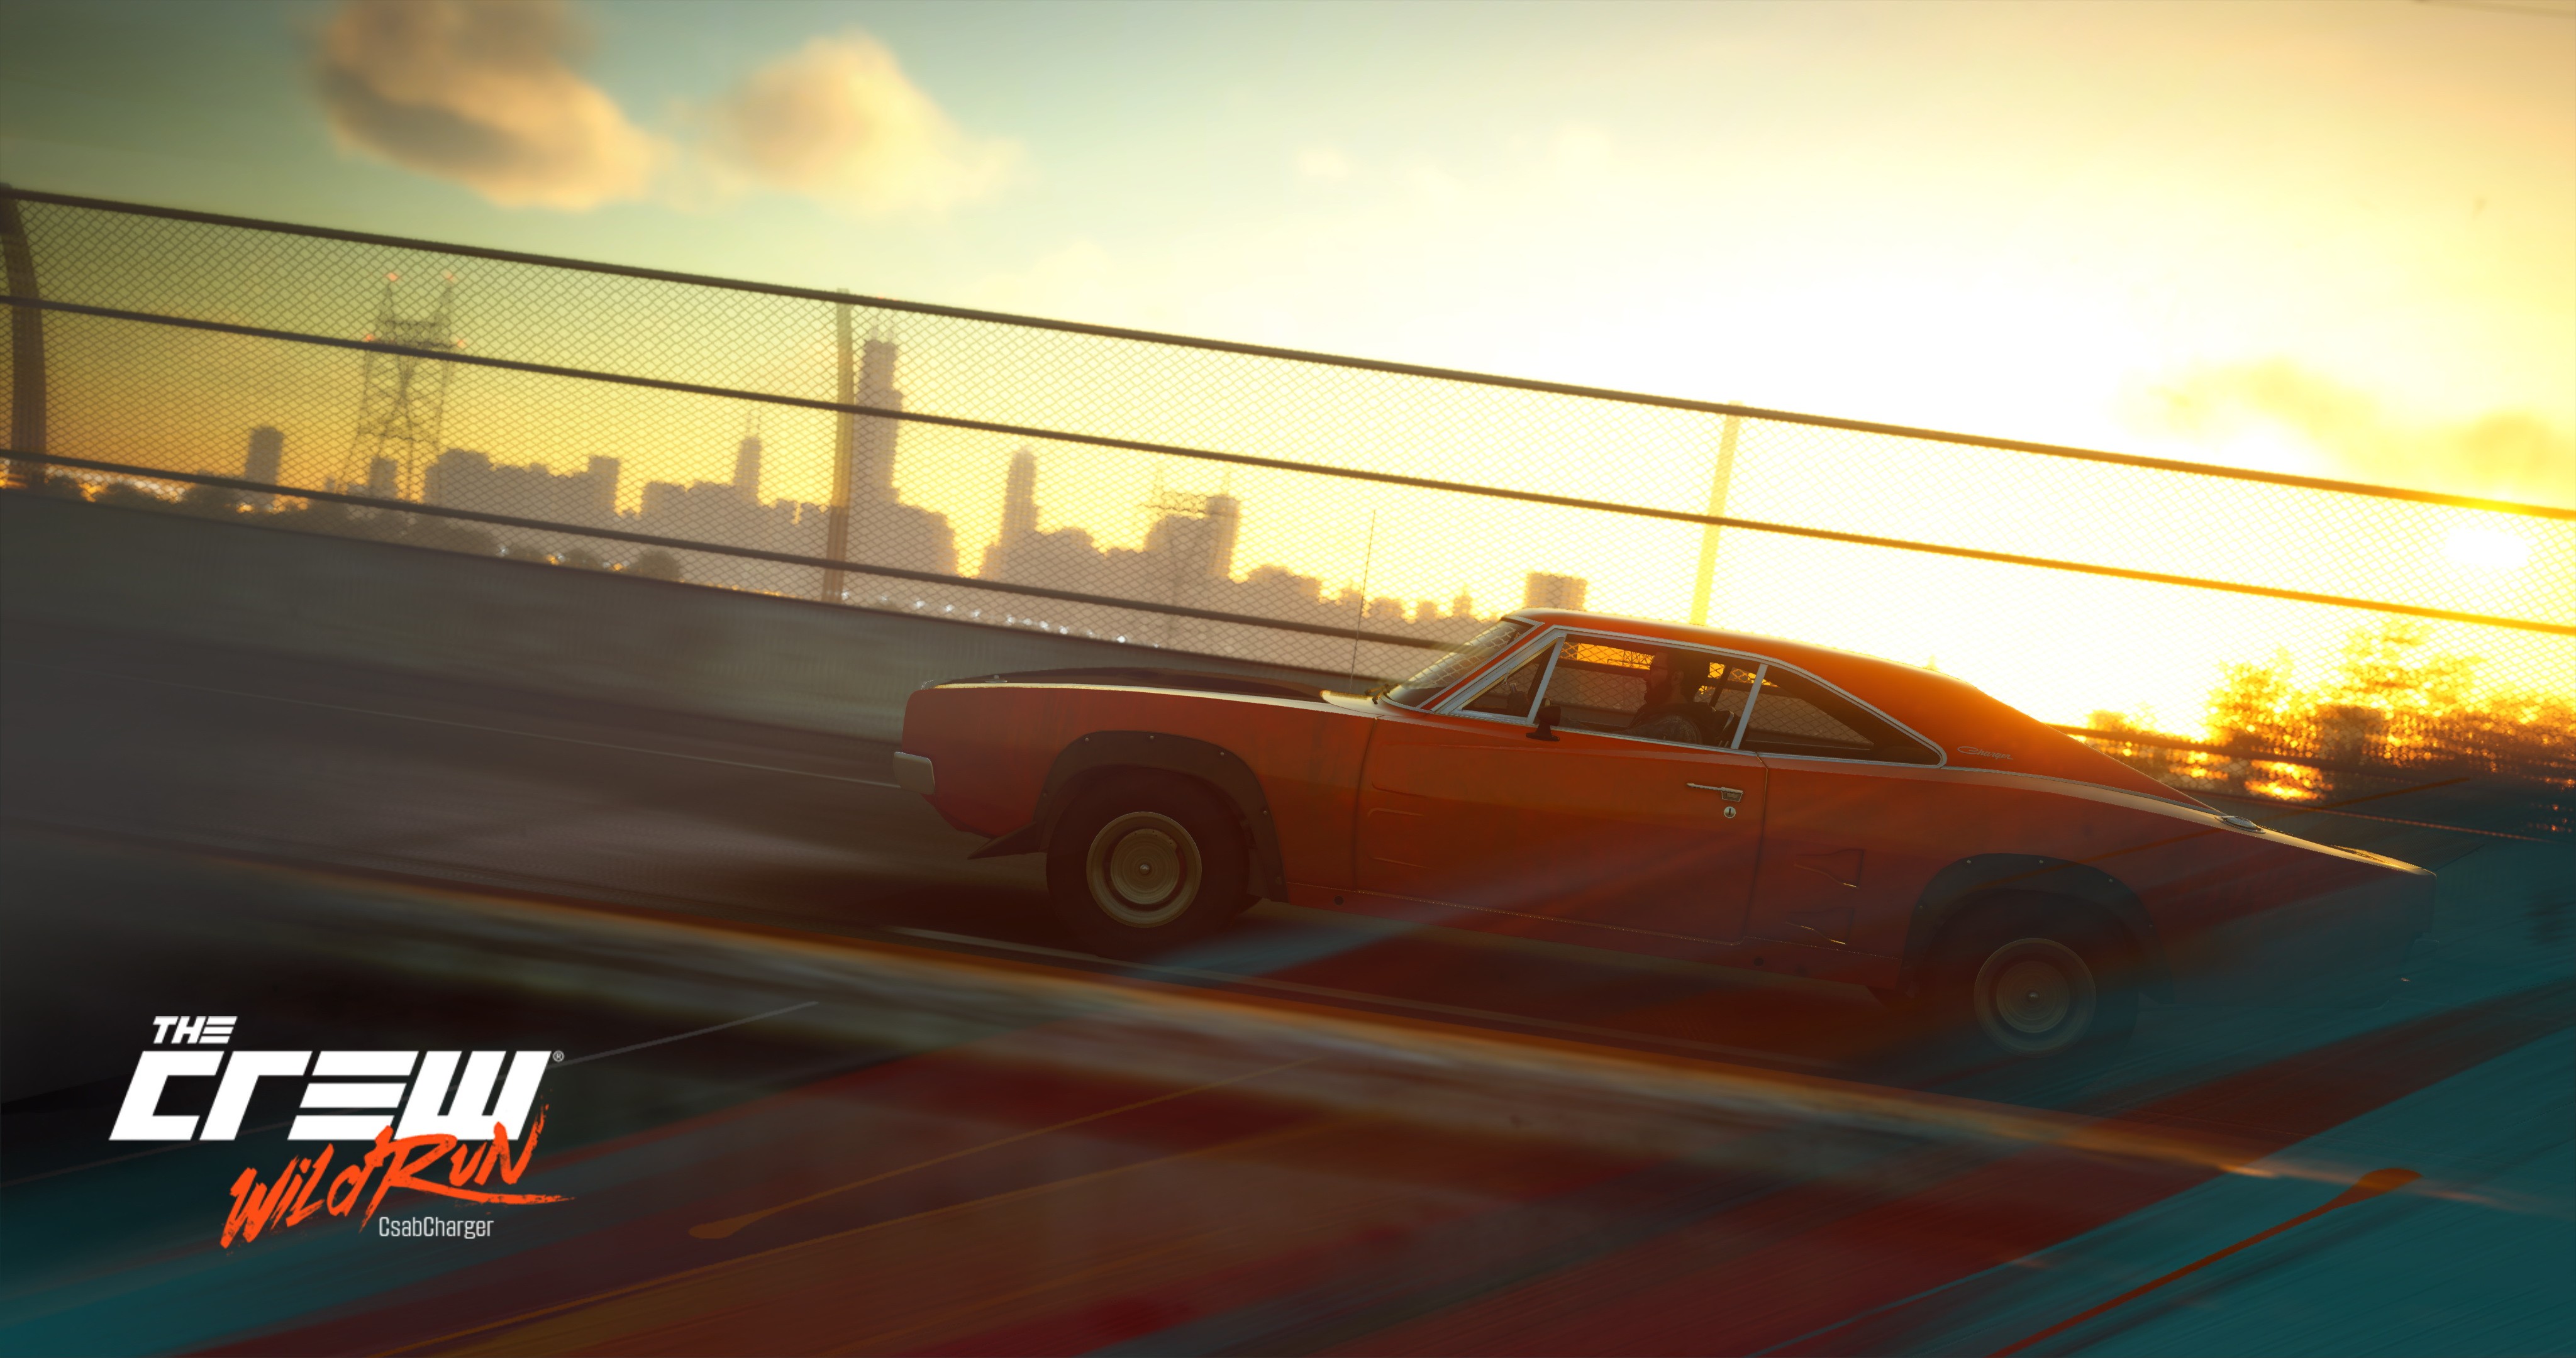 General 4096x2160 Dodge Charger The Crew The Crew Wild Run sunset race cars video games Ubisoft muscle cars American cars